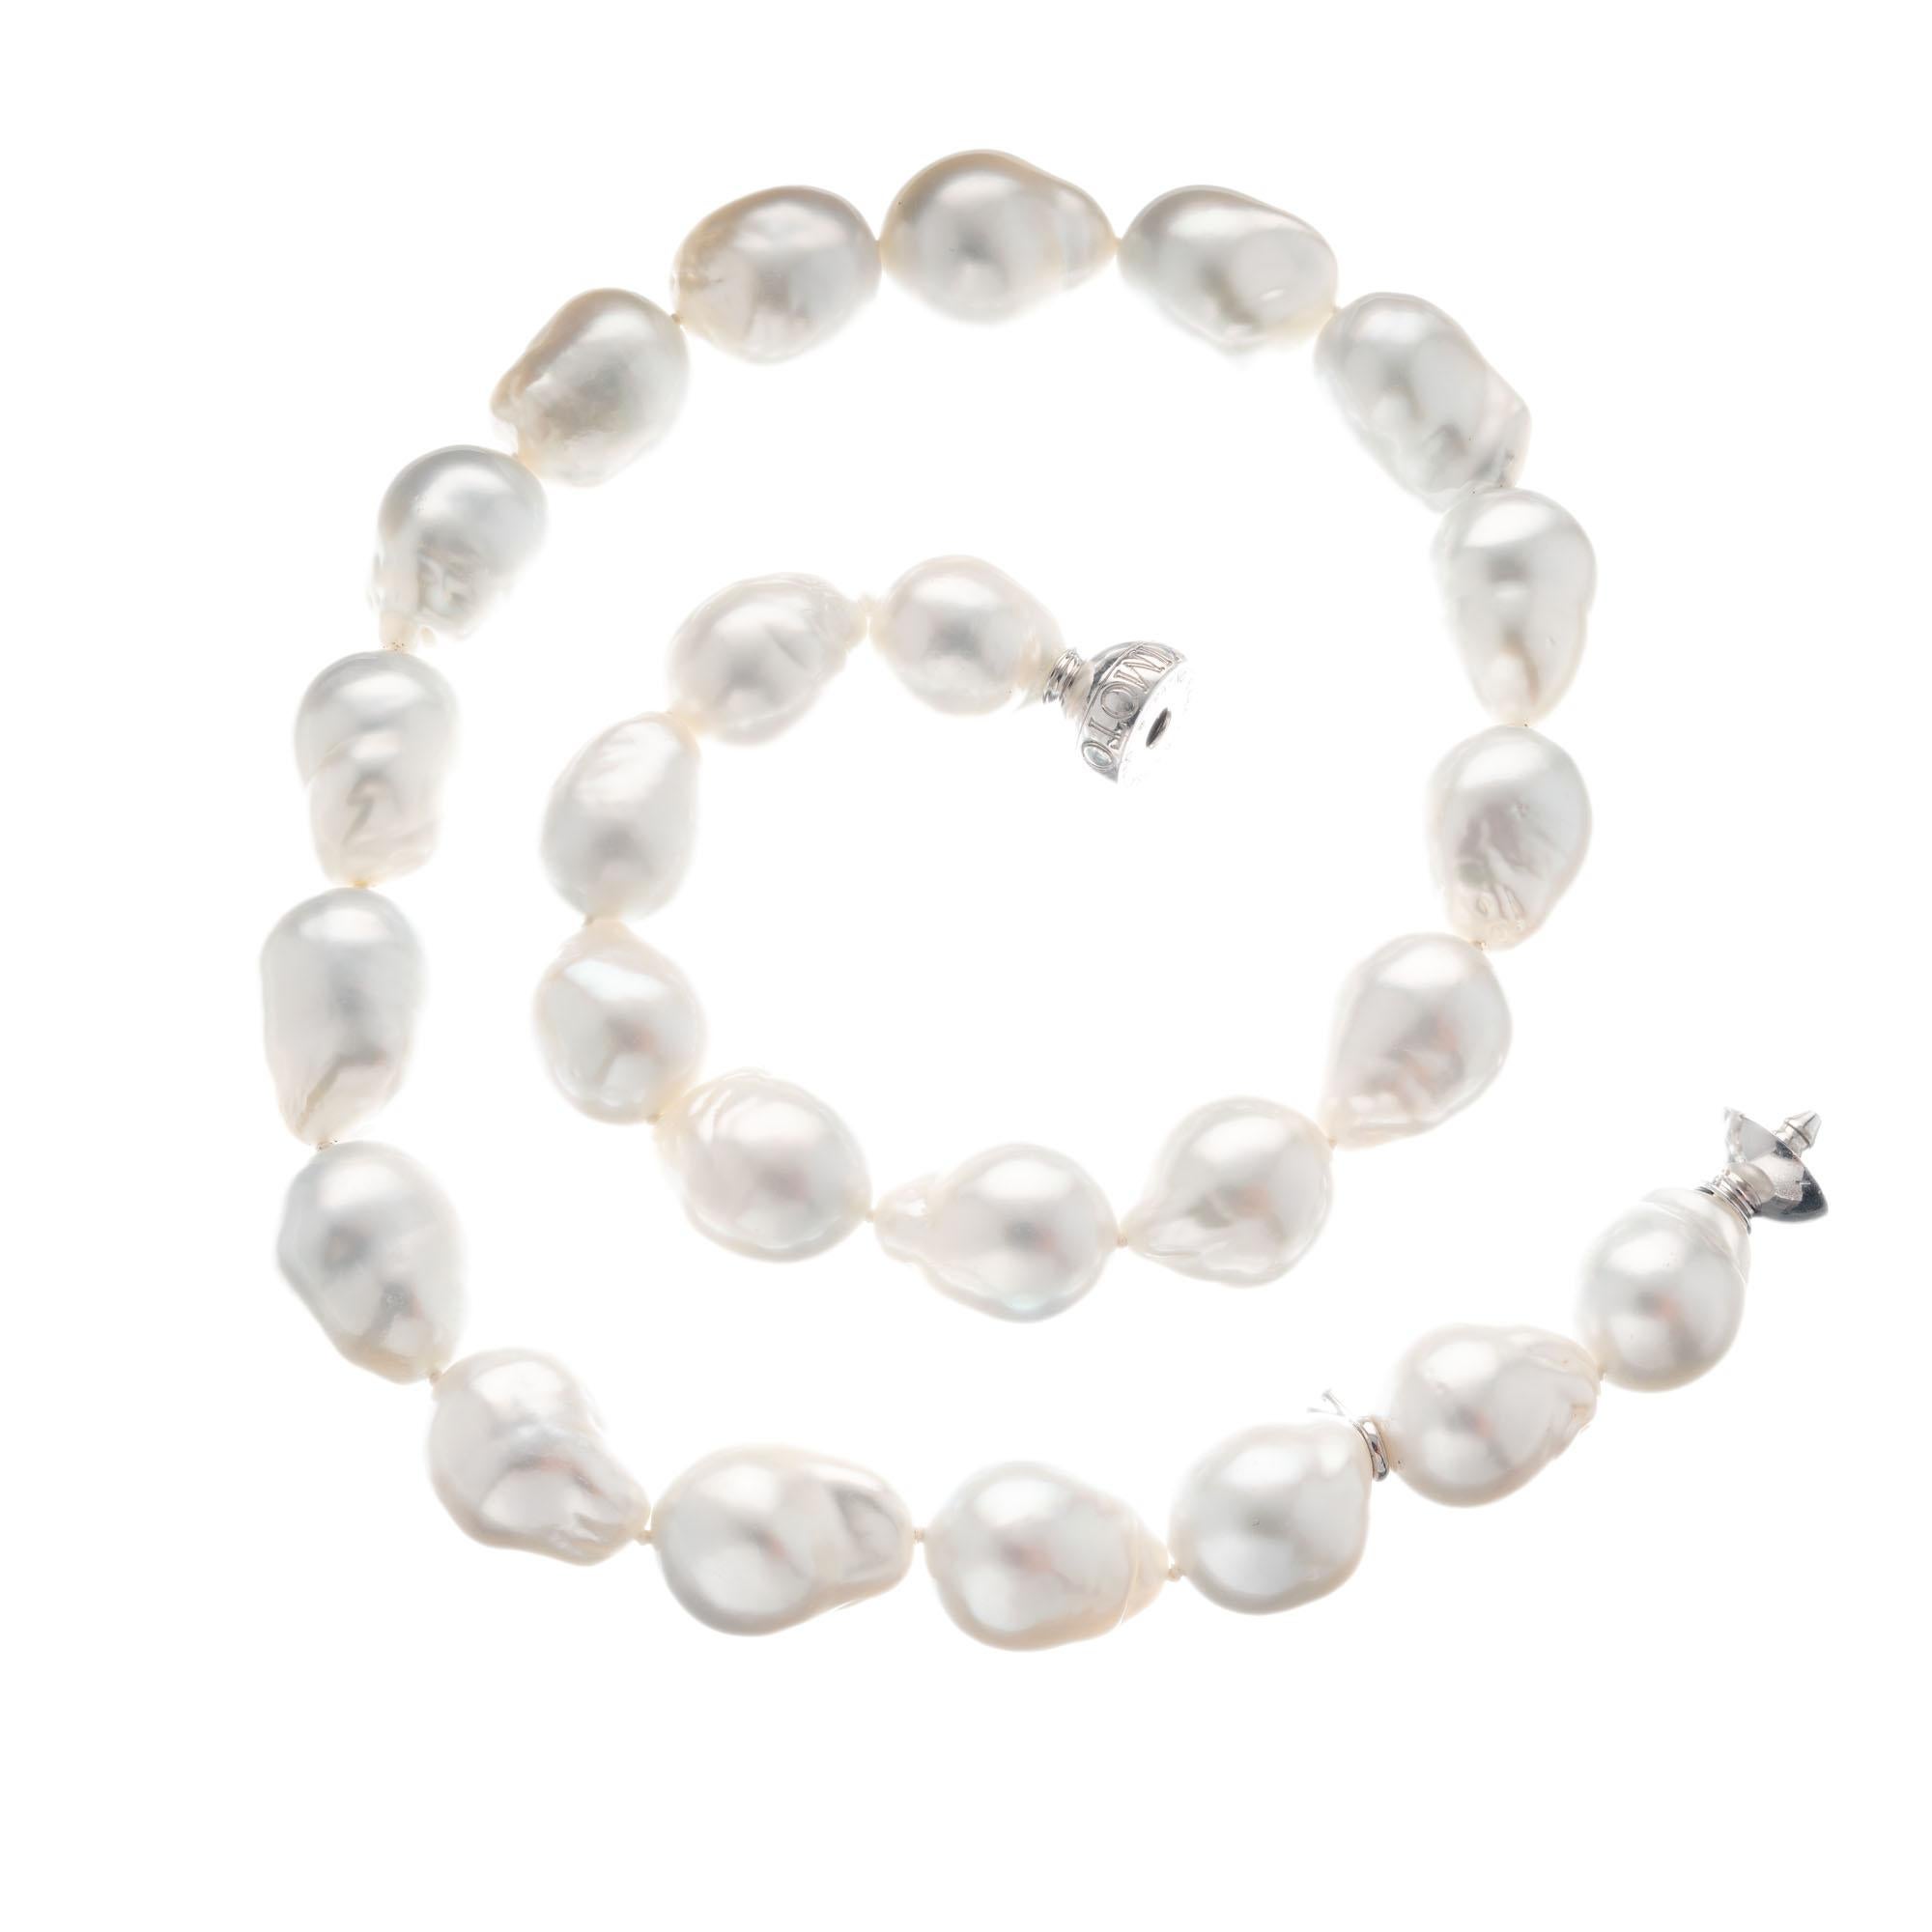 Mikimoto Baroque South Sea Pearl Gold Necklace In Excellent Condition For Sale In Stamford, CT